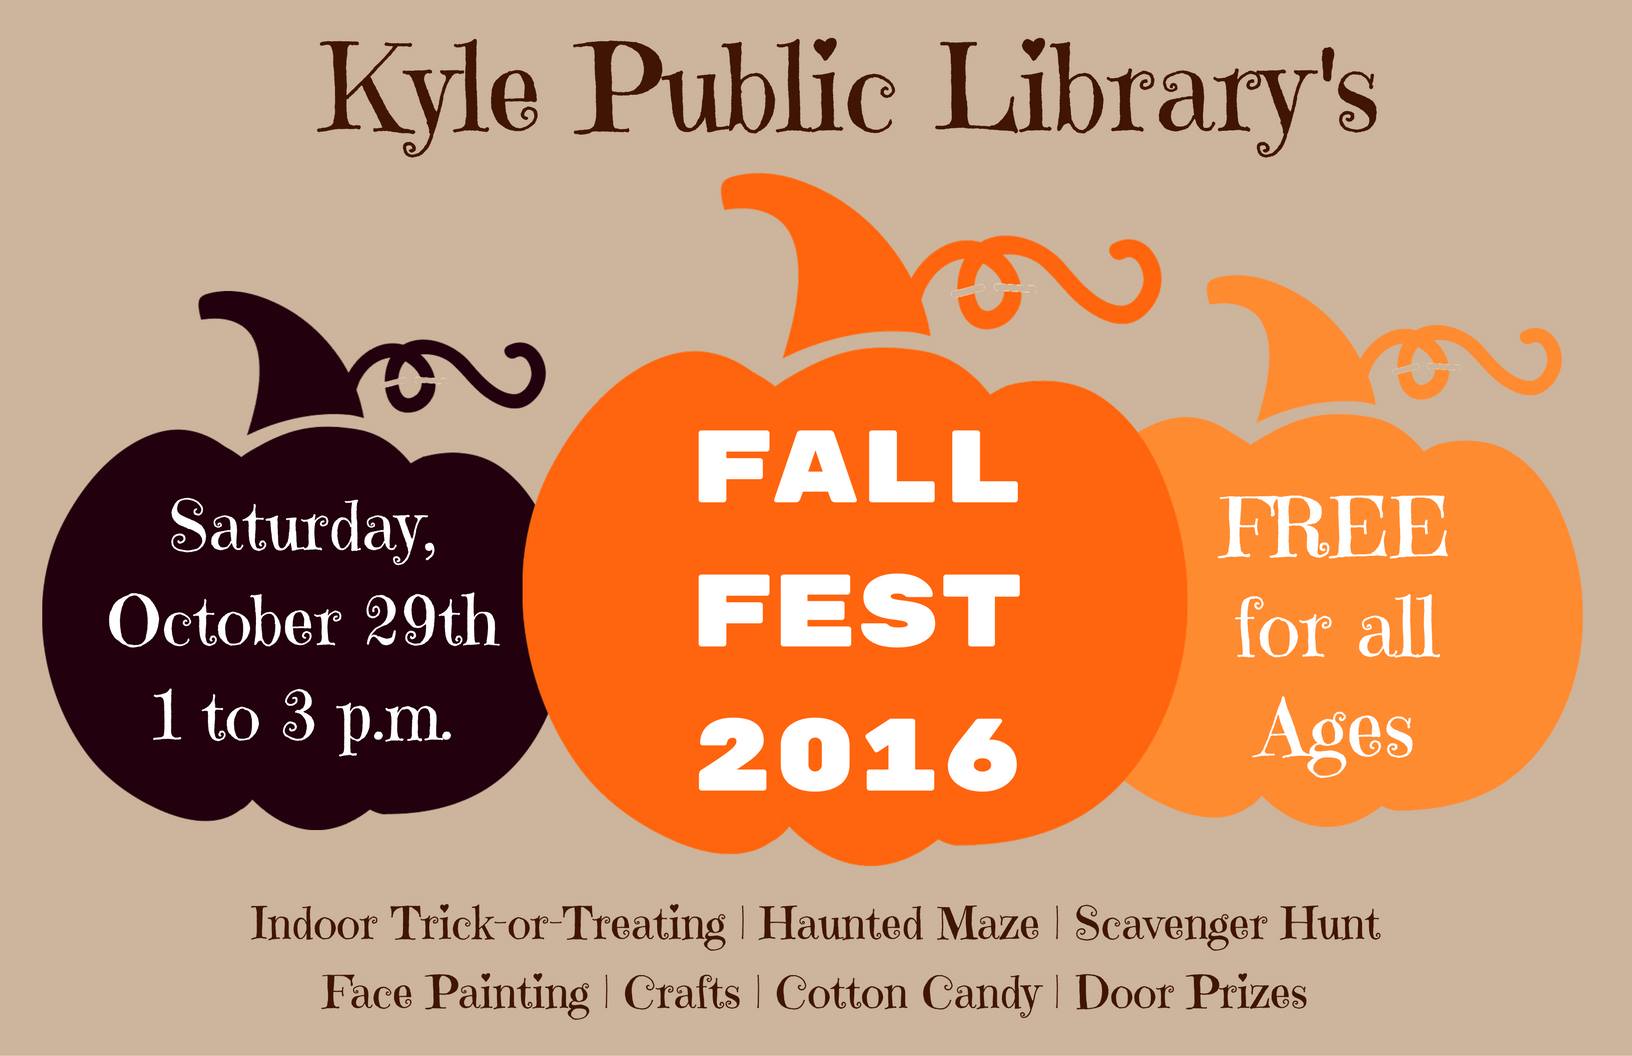 Kyle Public Library’s Inaugural Fall Fest 2016